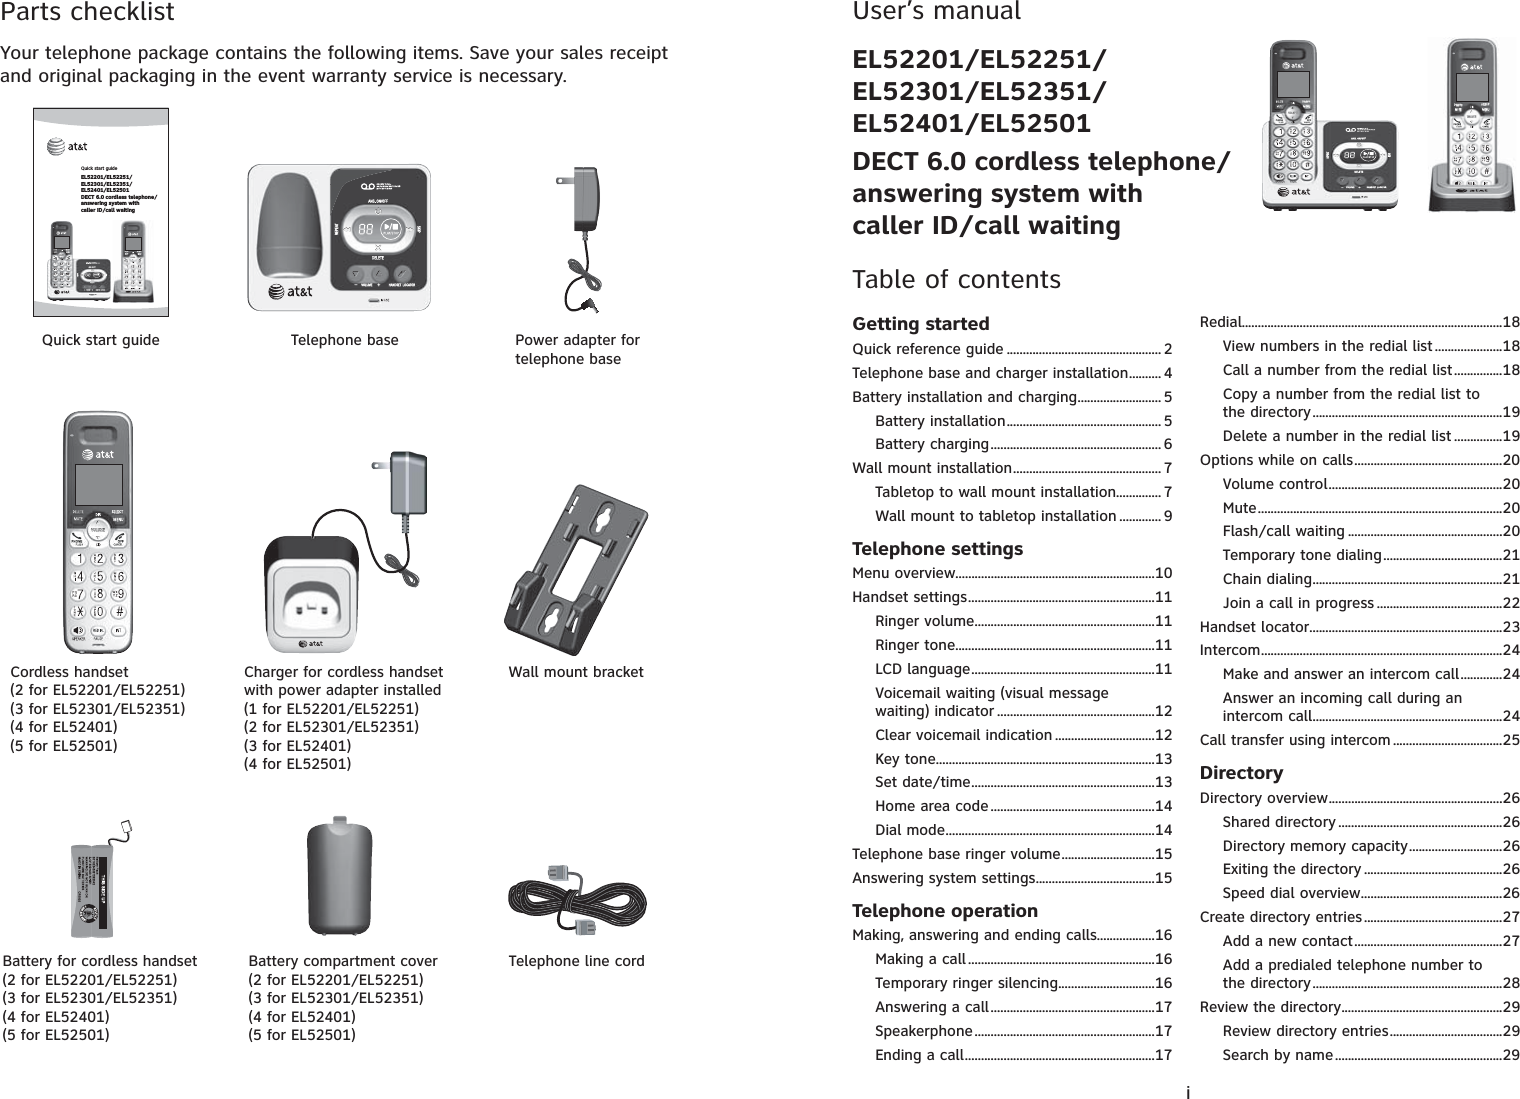 Parts checklistYour telephone package contains the following items. Save your sales receipt and original packaging in the event warranty service is necessary.Wall mount bracketTelephone base Power adapter for telephone baseCordless handset(2 for EL52201/EL52251)(3 for EL52301/EL52351)(4 for EL52401)(5 for EL52501)Charger for cordless handset with power adapter installed(1 for EL52201/EL52251)(2 for EL52301/EL52351)(3 for EL52401)(4 for EL52501)Battery compartment cover(2 for EL52201/EL52251)(3 for EL52301/EL52351)(4 for EL52401)(5 for EL52501)Telephone line cordQuick start guideBattery for cordless handset(2 for EL52201/EL52251)(3 for EL52301/EL52351)(4 for EL52401)(5 for EL52501)Quick start guideEL52201/EL52251/EL52301/EL52351/EL52401/EL52501DECT 6.0 cordless telephone/answering system with caller ID/call waitingUser’s manualEL52201/EL52251/EL52301/EL52351/EL52401/EL52501DECT 6.0 cordless telephone/answering system with caller ID/call waitingTable of contentsGetting startedQuick reference guide ................................................ 2Telephone base and charger installation.......... 4Battery installation and charging.......................... 5Battery installation................................................ 5Battery charging..................................................... 6Wall mount installation.............................................. 7Tabletop to wall mount installation.............. 7Wall mount to tabletop installation ............. 9Telephone settingsMenu overview..............................................................10Handset settings..........................................................11Ringer volume........................................................11Ringer tone..............................................................11LCD language.........................................................11Voicemail waiting (visual message waiting) indicator .................................................12Clear voicemail indication ...............................12Key tone....................................................................13Set date/time.........................................................13Home area code...................................................14Dial mode.................................................................14Telephone base ringer volume.............................15Answering system settings.....................................15Telephone operationMaking, answering and ending calls..................16Making a call ..........................................................16Temporary ringer silencing..............................16Answering a call...................................................17Speakerphone........................................................17Ending a call...........................................................17Redial.................................................................................18View numbers in the redial list.....................18Call a number from the redial list...............18Copy a number from the redial list to the directory...........................................................19Delete a number in the redial list ...............19Options while on calls..............................................20Volume control......................................................20Mute............................................................................20Flash/call waiting ................................................20Temporary tone dialing.....................................21Chain dialing...........................................................21Join a call in progress .......................................22Handset locator............................................................23Intercom...........................................................................24Make and answer an intercom call.............24Answer an incoming call during an intercom call...........................................................24Call transfer using intercom ..................................25DirectoryDirectory overview......................................................26Shared directory ...................................................26Directory memory capacity.............................26Exiting the directory ...........................................26Speed dial overview............................................26Create directory entries...........................................27Add a new contact..............................................27Add a predialed telephone number to the directory...........................................................28Review the directory..................................................29Review directory entries...................................29Search by name....................................................29i